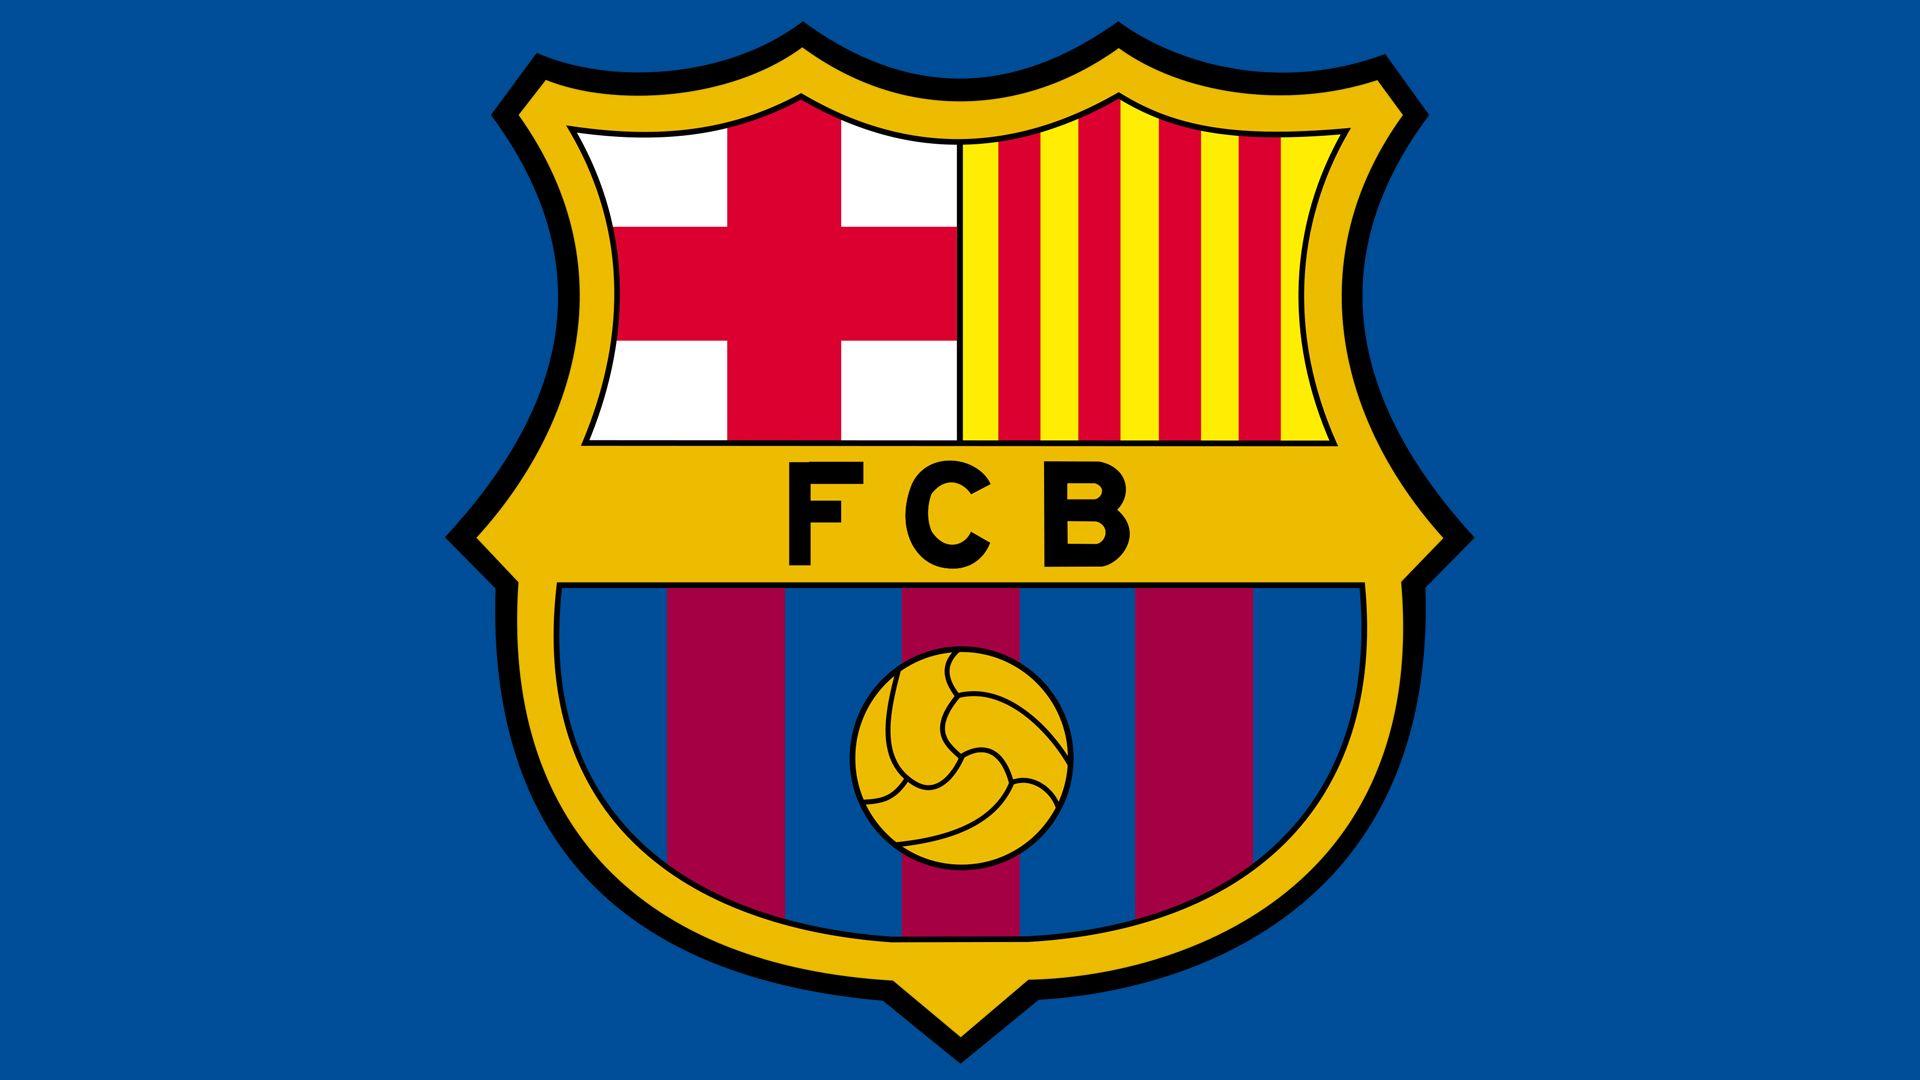 Two Red Rhombus Logo - Barcelona Logo, Barcelona Symbol Meaning, History and Evolution